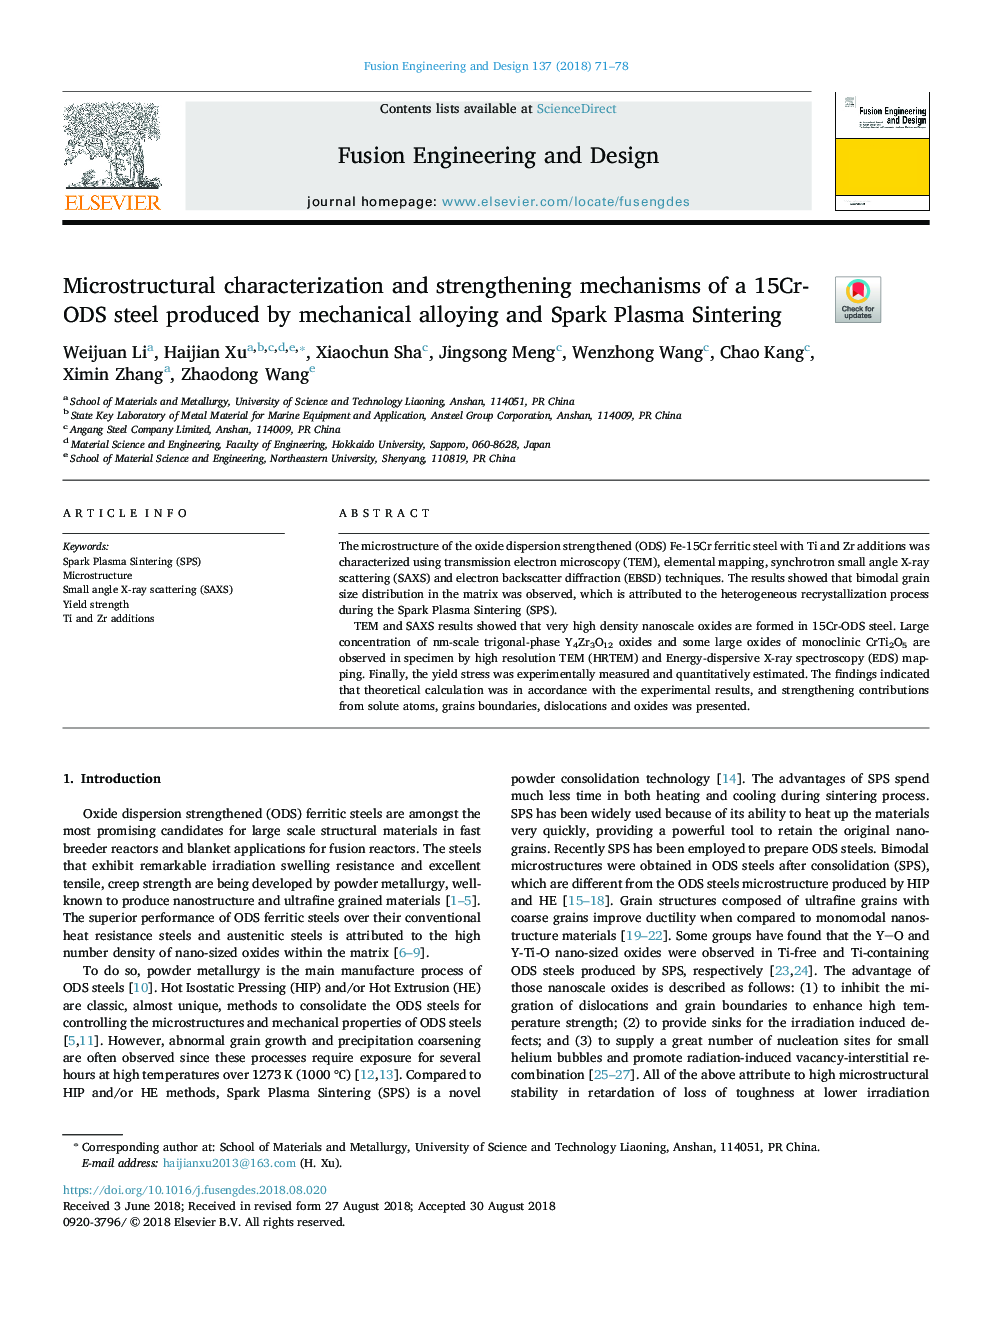 Microstructural characterization and strengthening mechanisms of a 15Cr-ODS steel produced by mechanical alloying and Spark Plasma Sintering